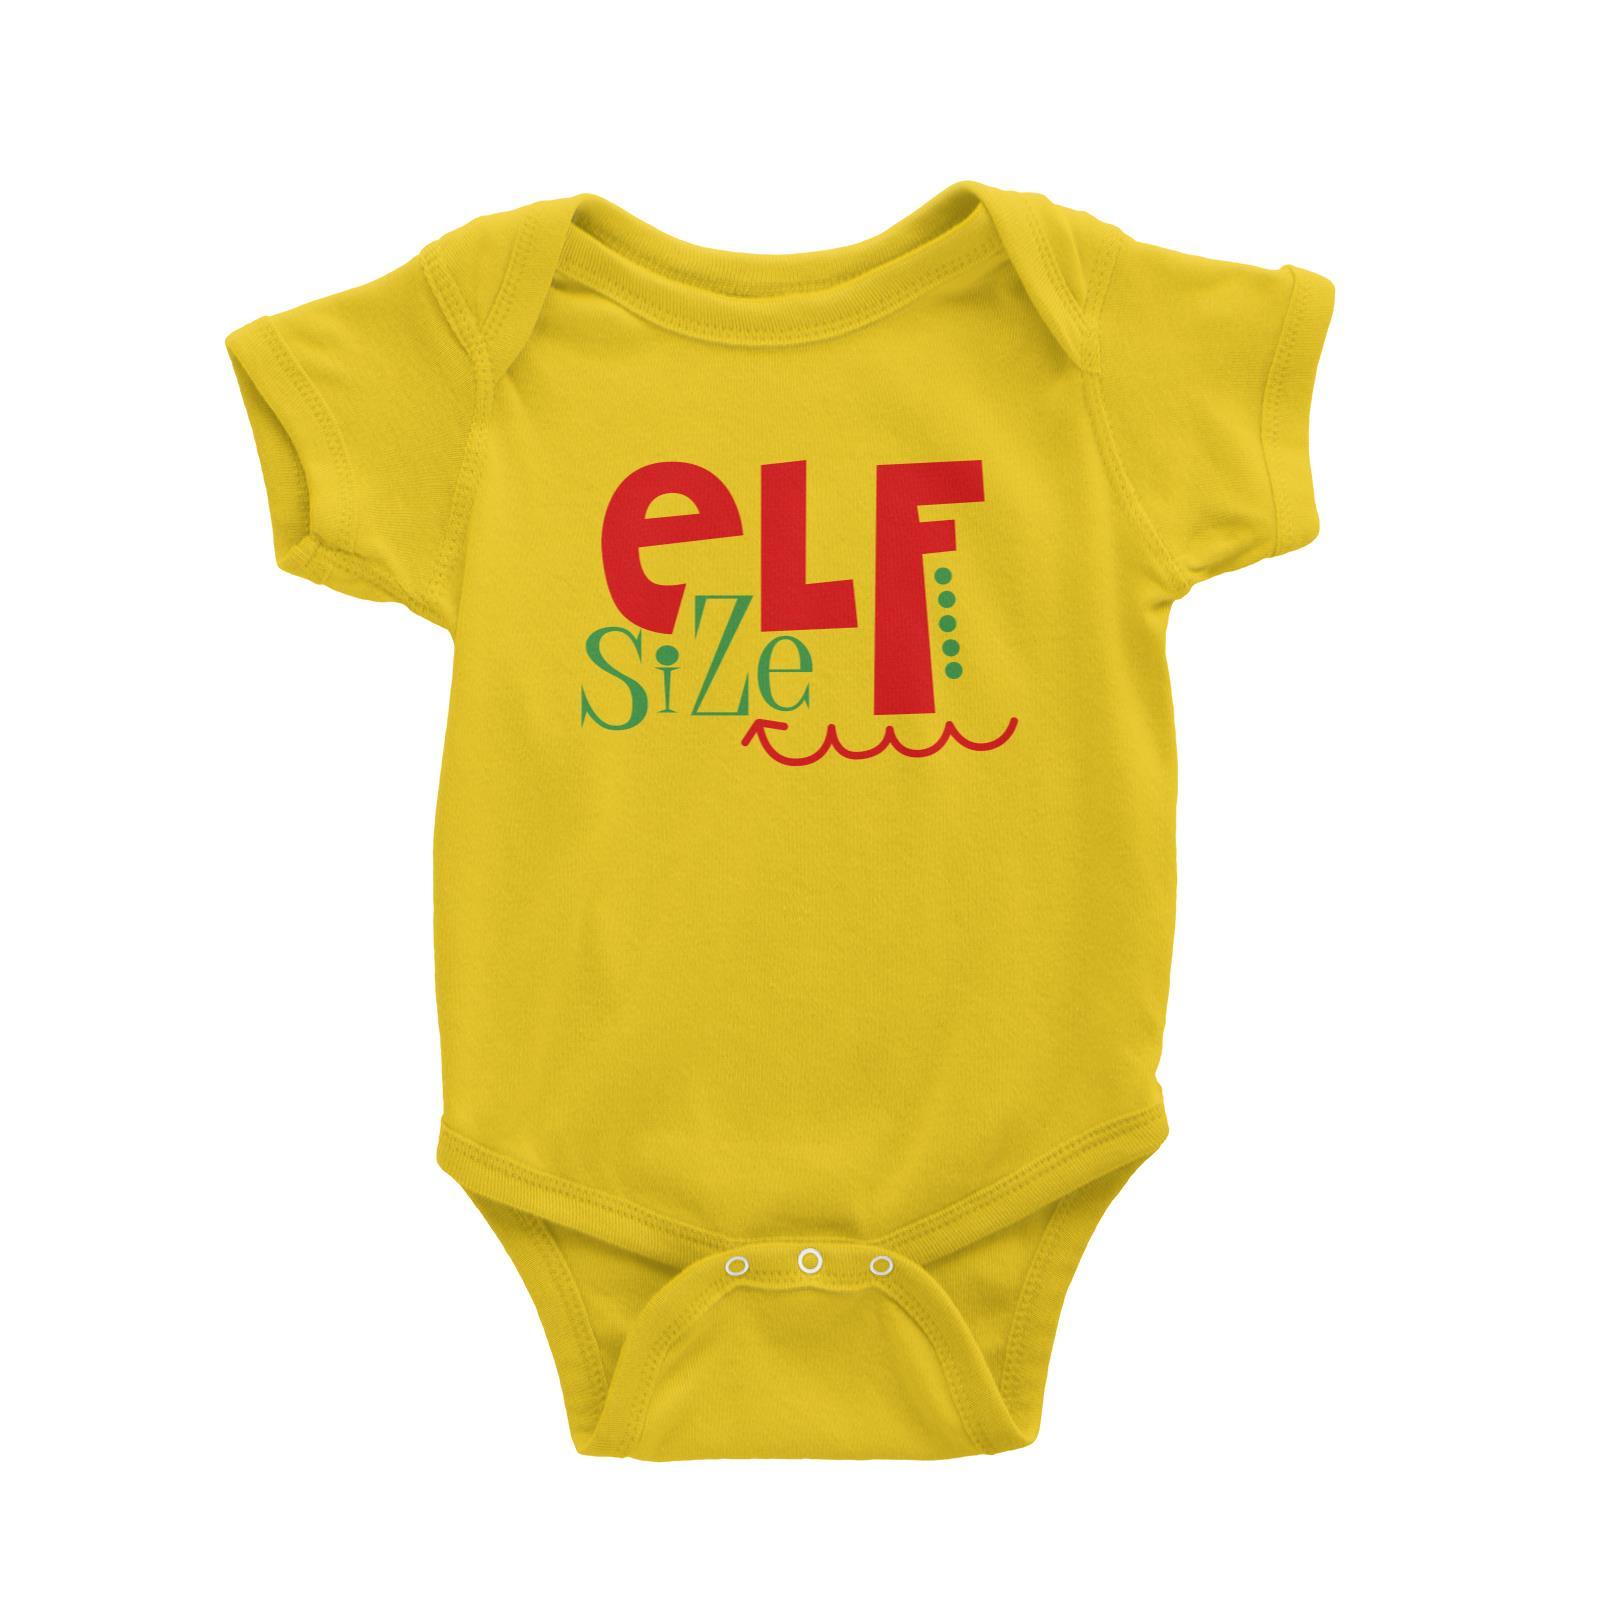 Elf Size Baby Romper Funny Christmas